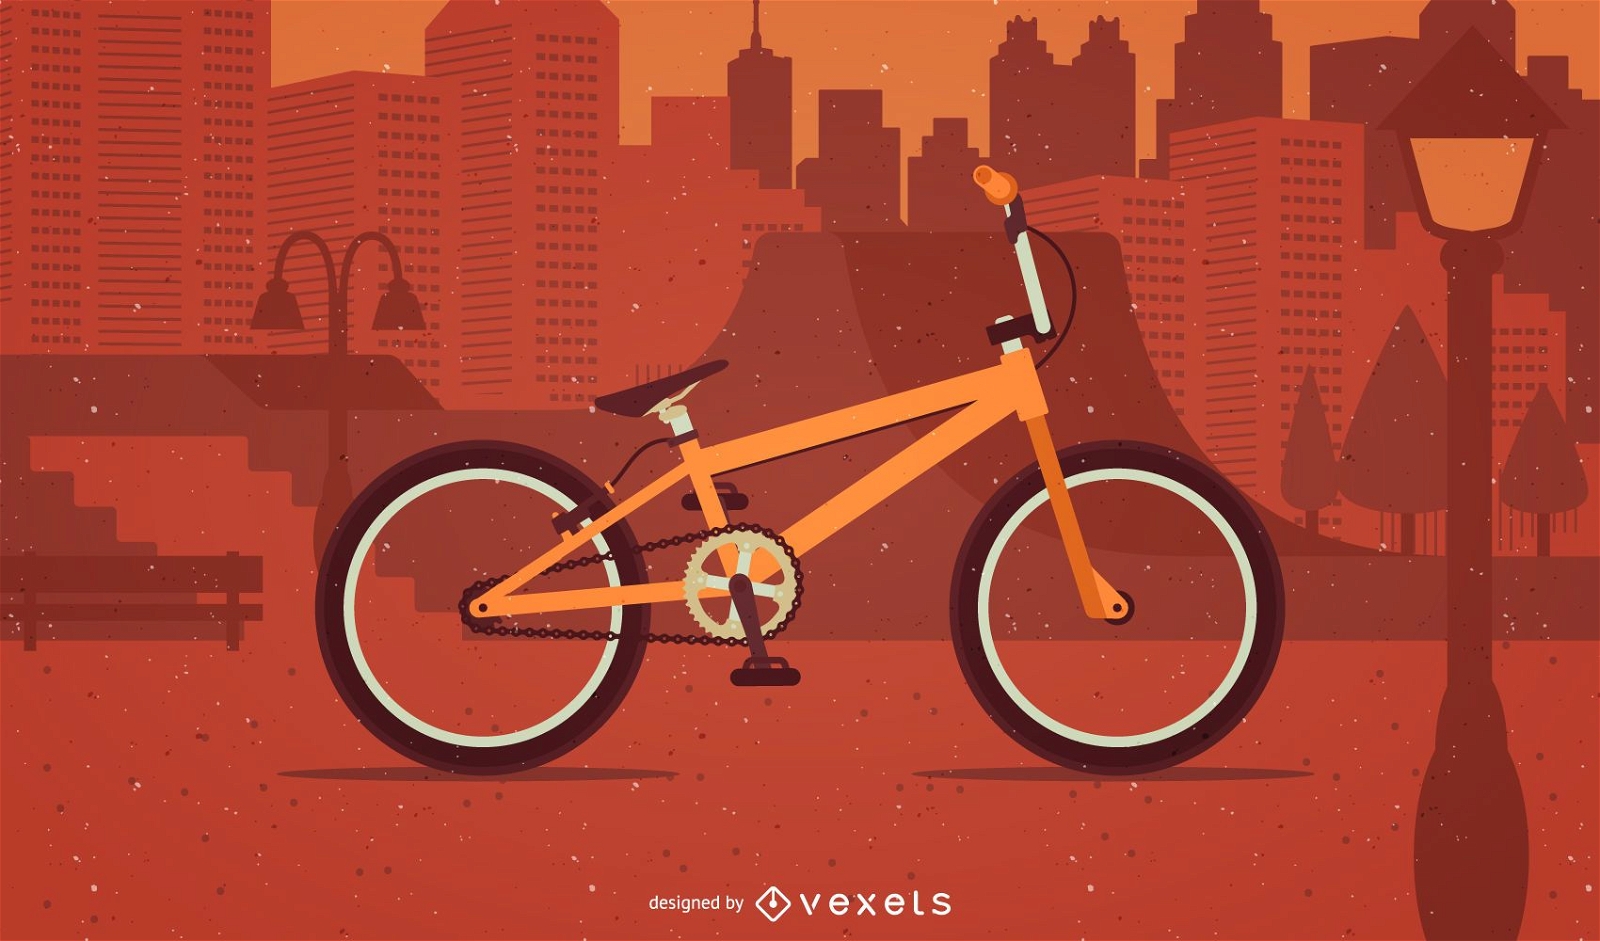 Flat bicycle illustration in a city